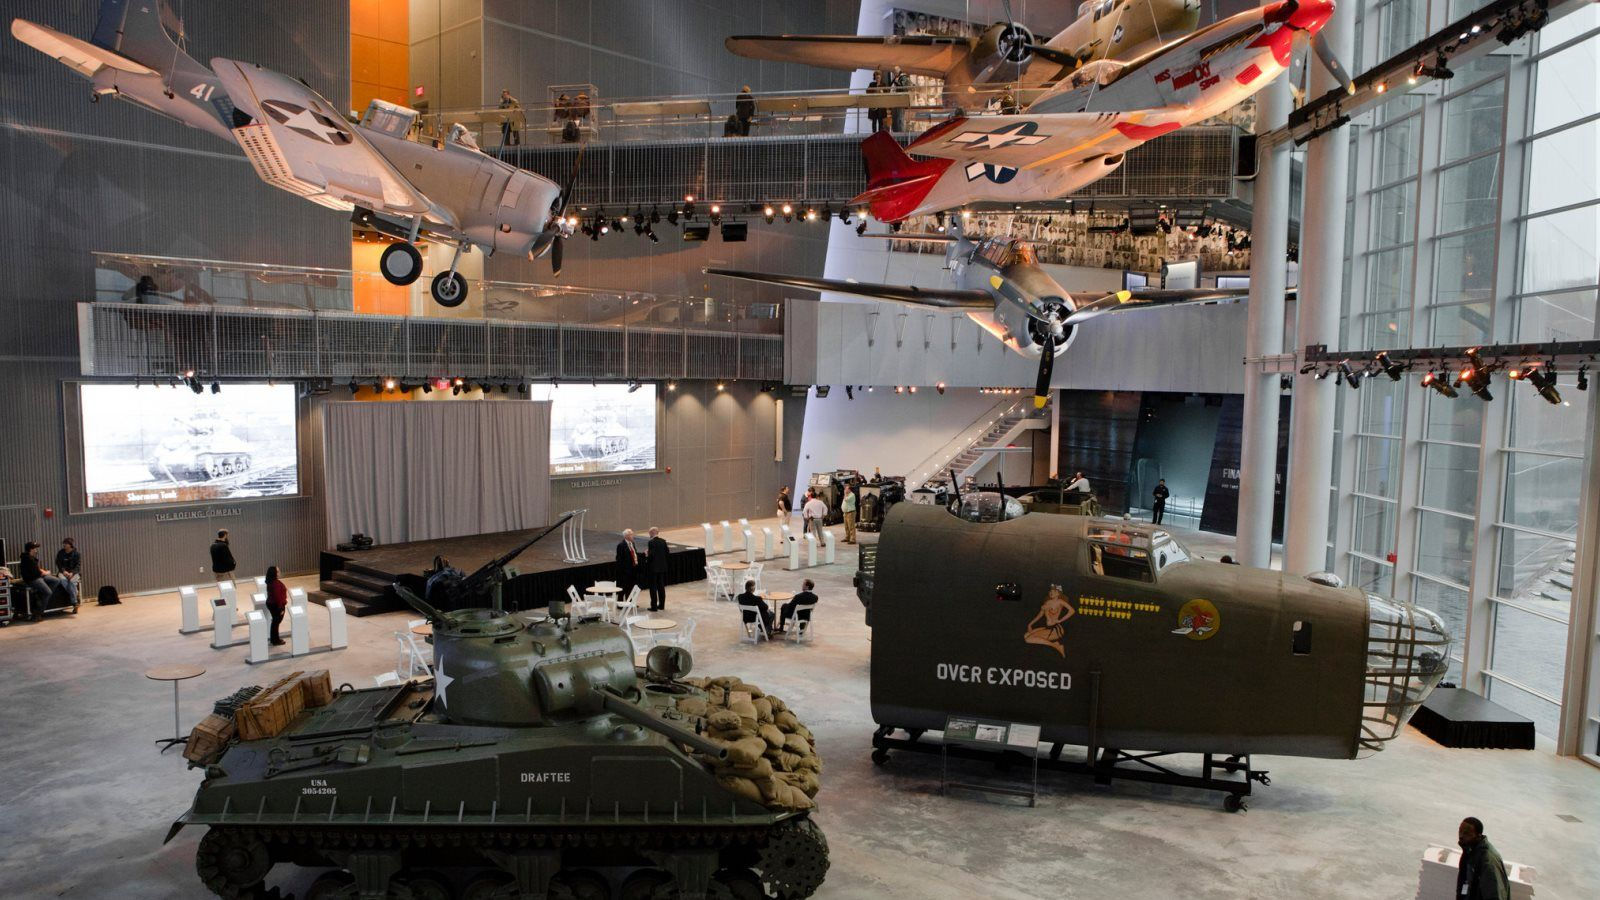 The National WWII Museum | W New Orleans - French Quarter